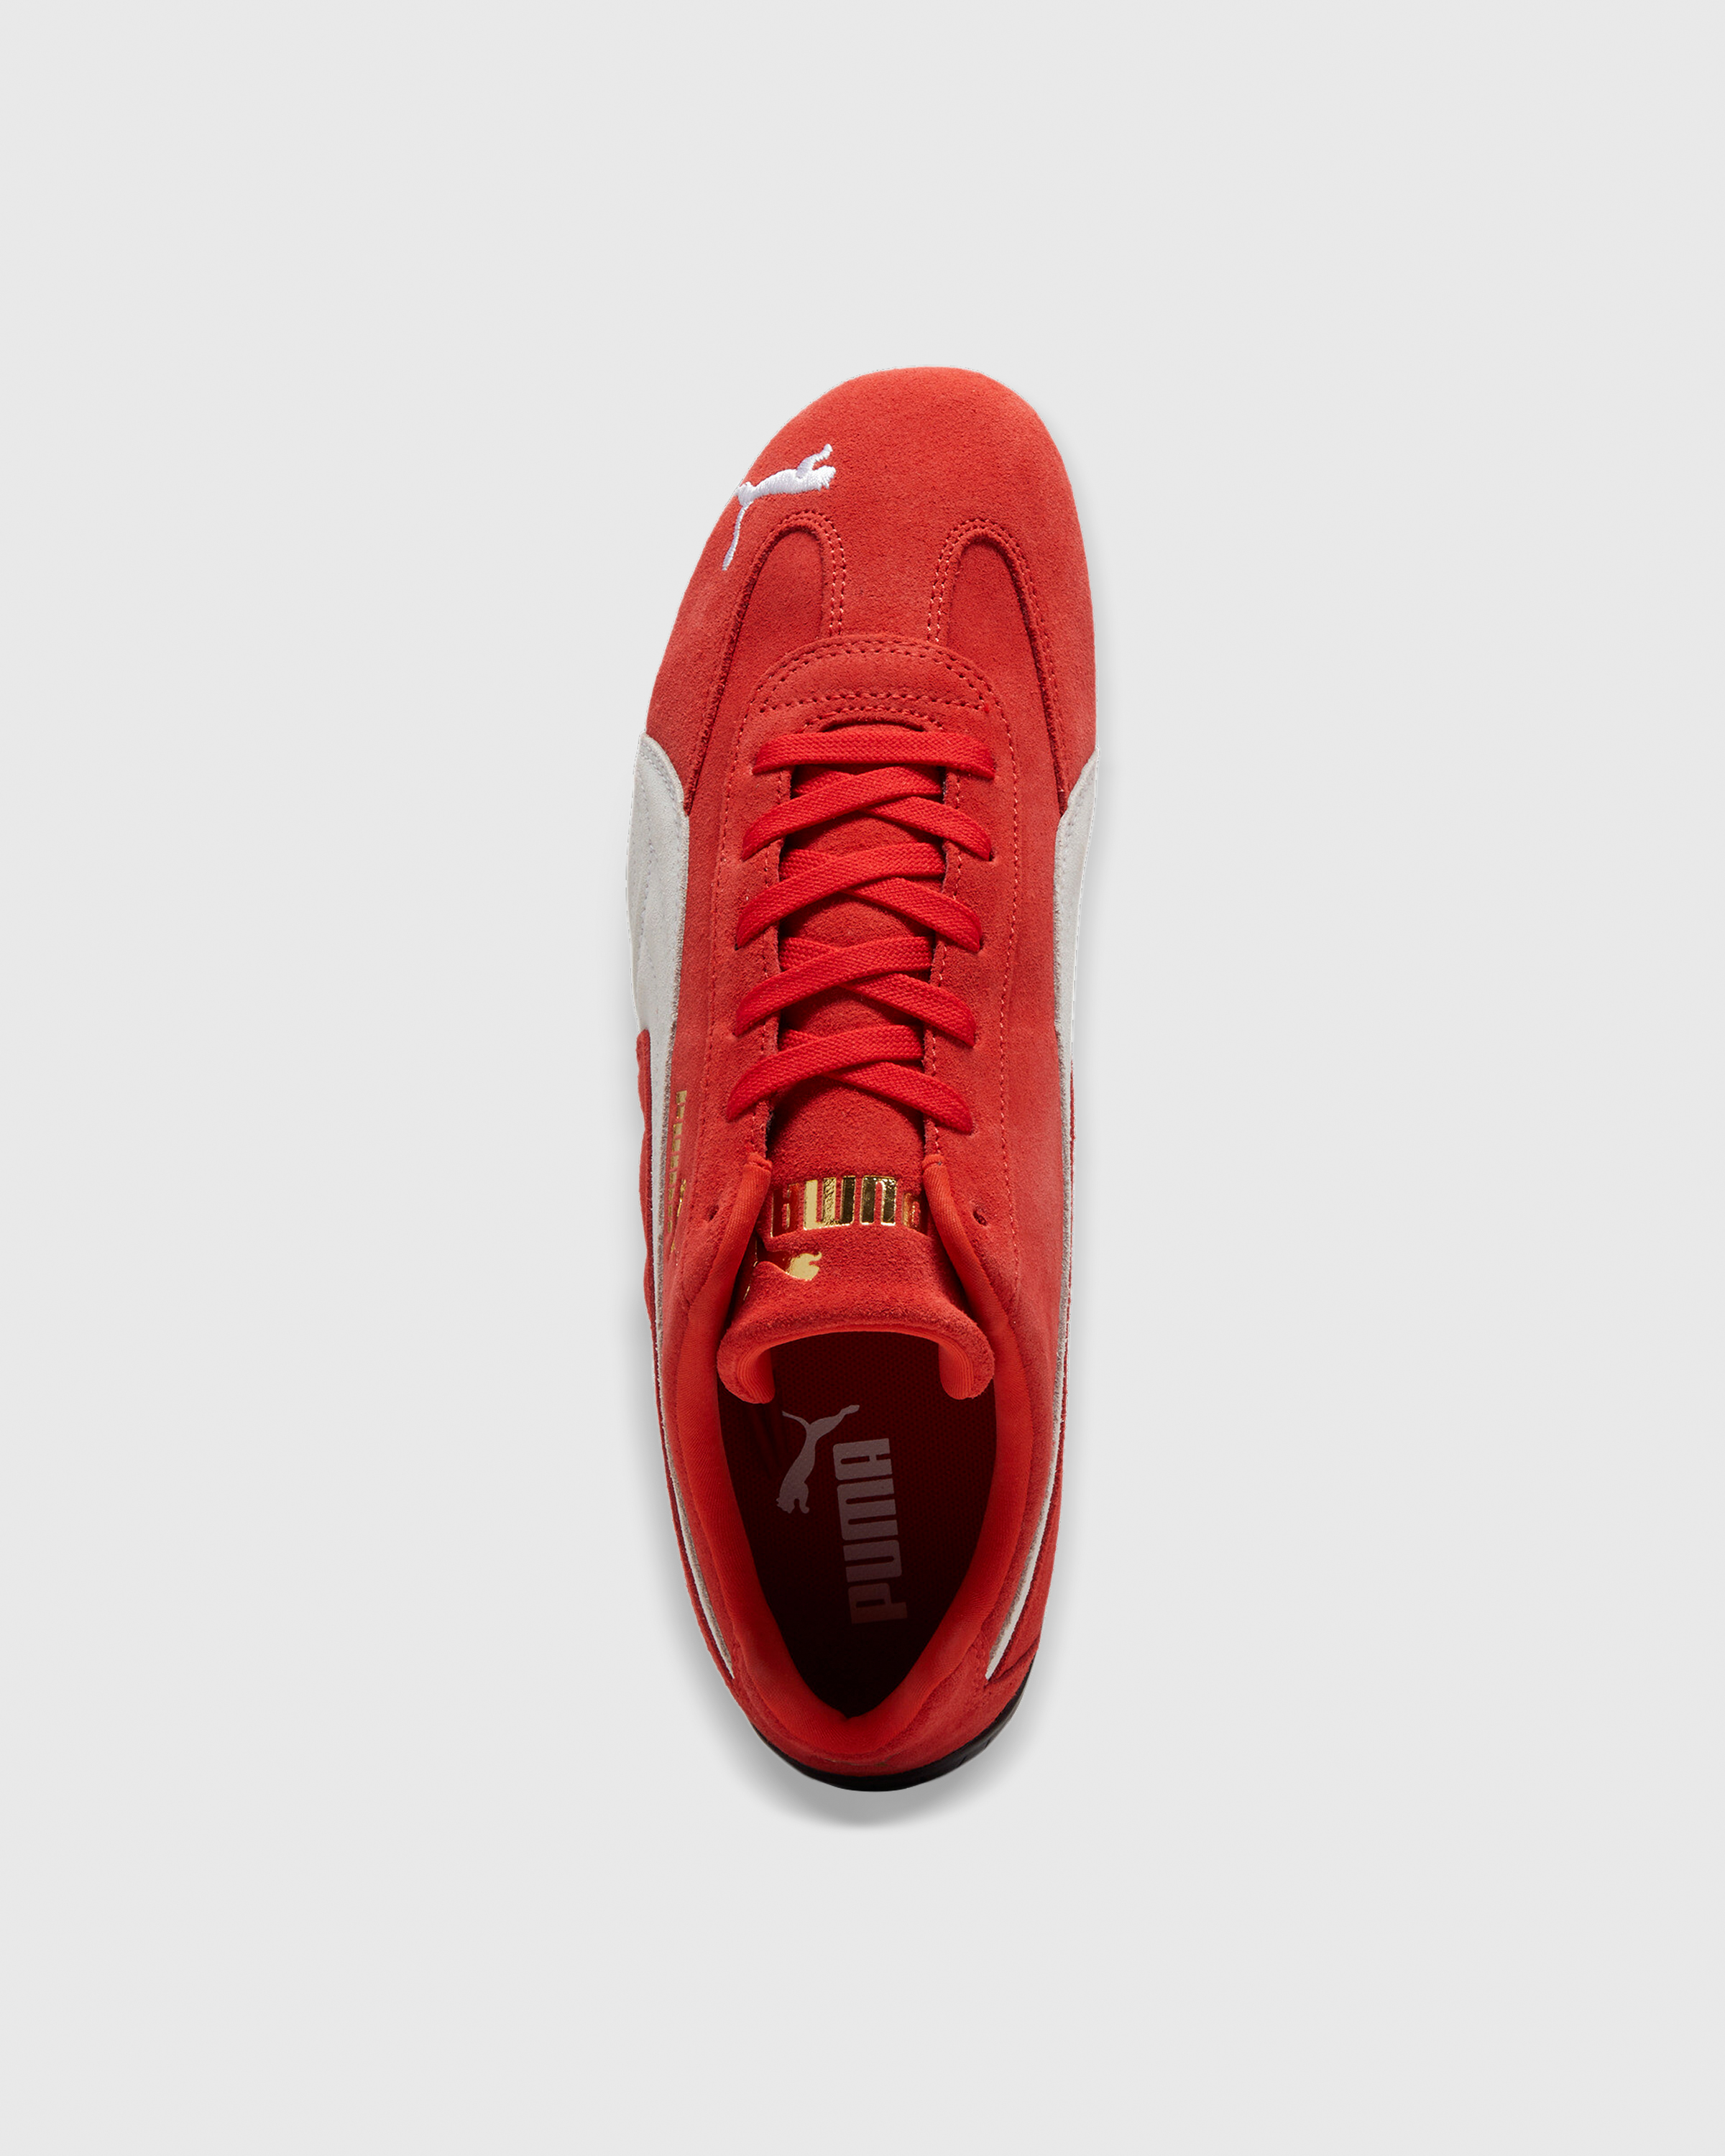 Puma – Speedcat OG Red/White - Low Top Sneakers - Red - Image 3